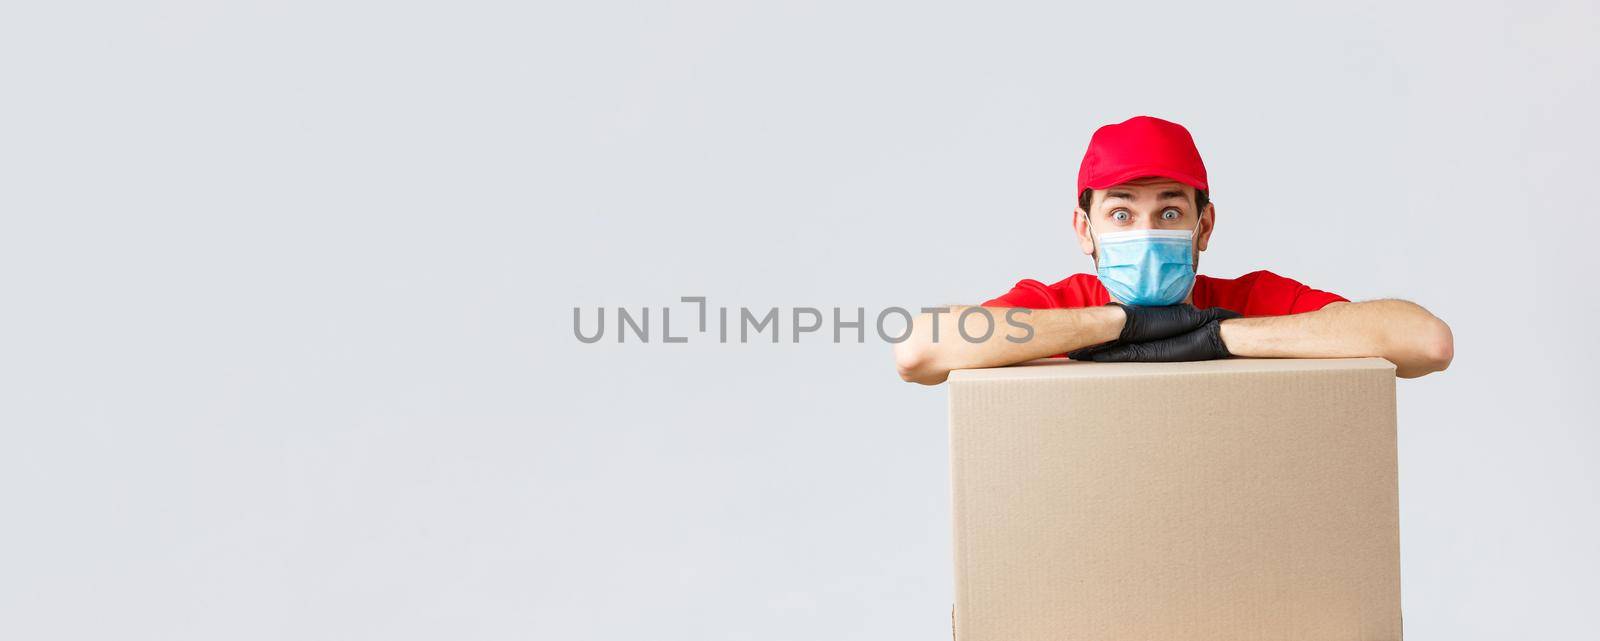 Packages and parcels delivery, covid-19 quarantine and transfer orders. Worried and confused courier in red uniform, gloves and face mask, lean on order box and look surprised camera.